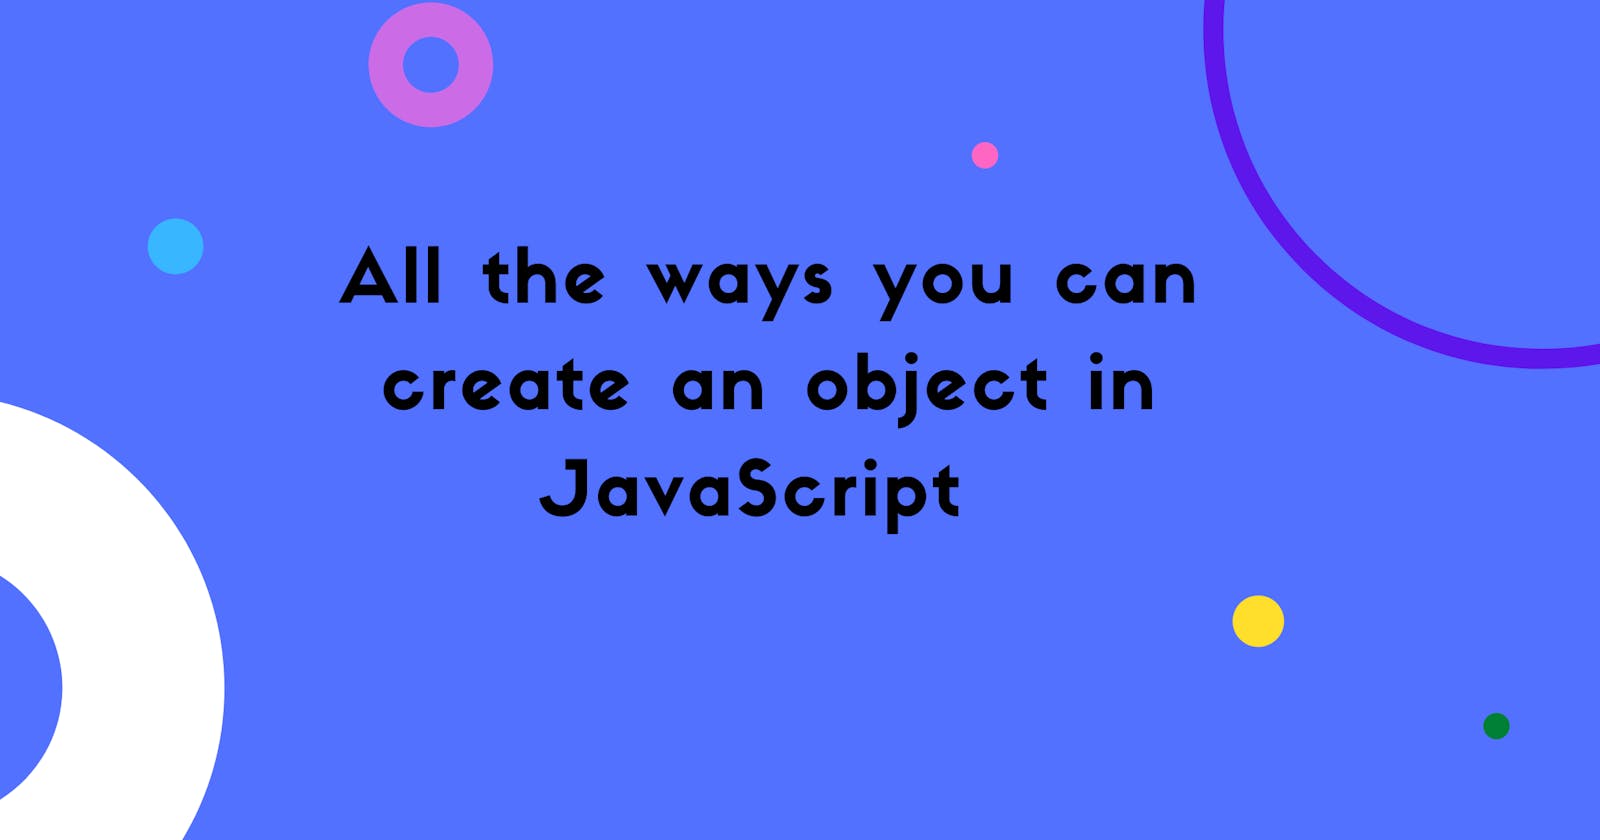 All the ways you can create an object in JavaScript